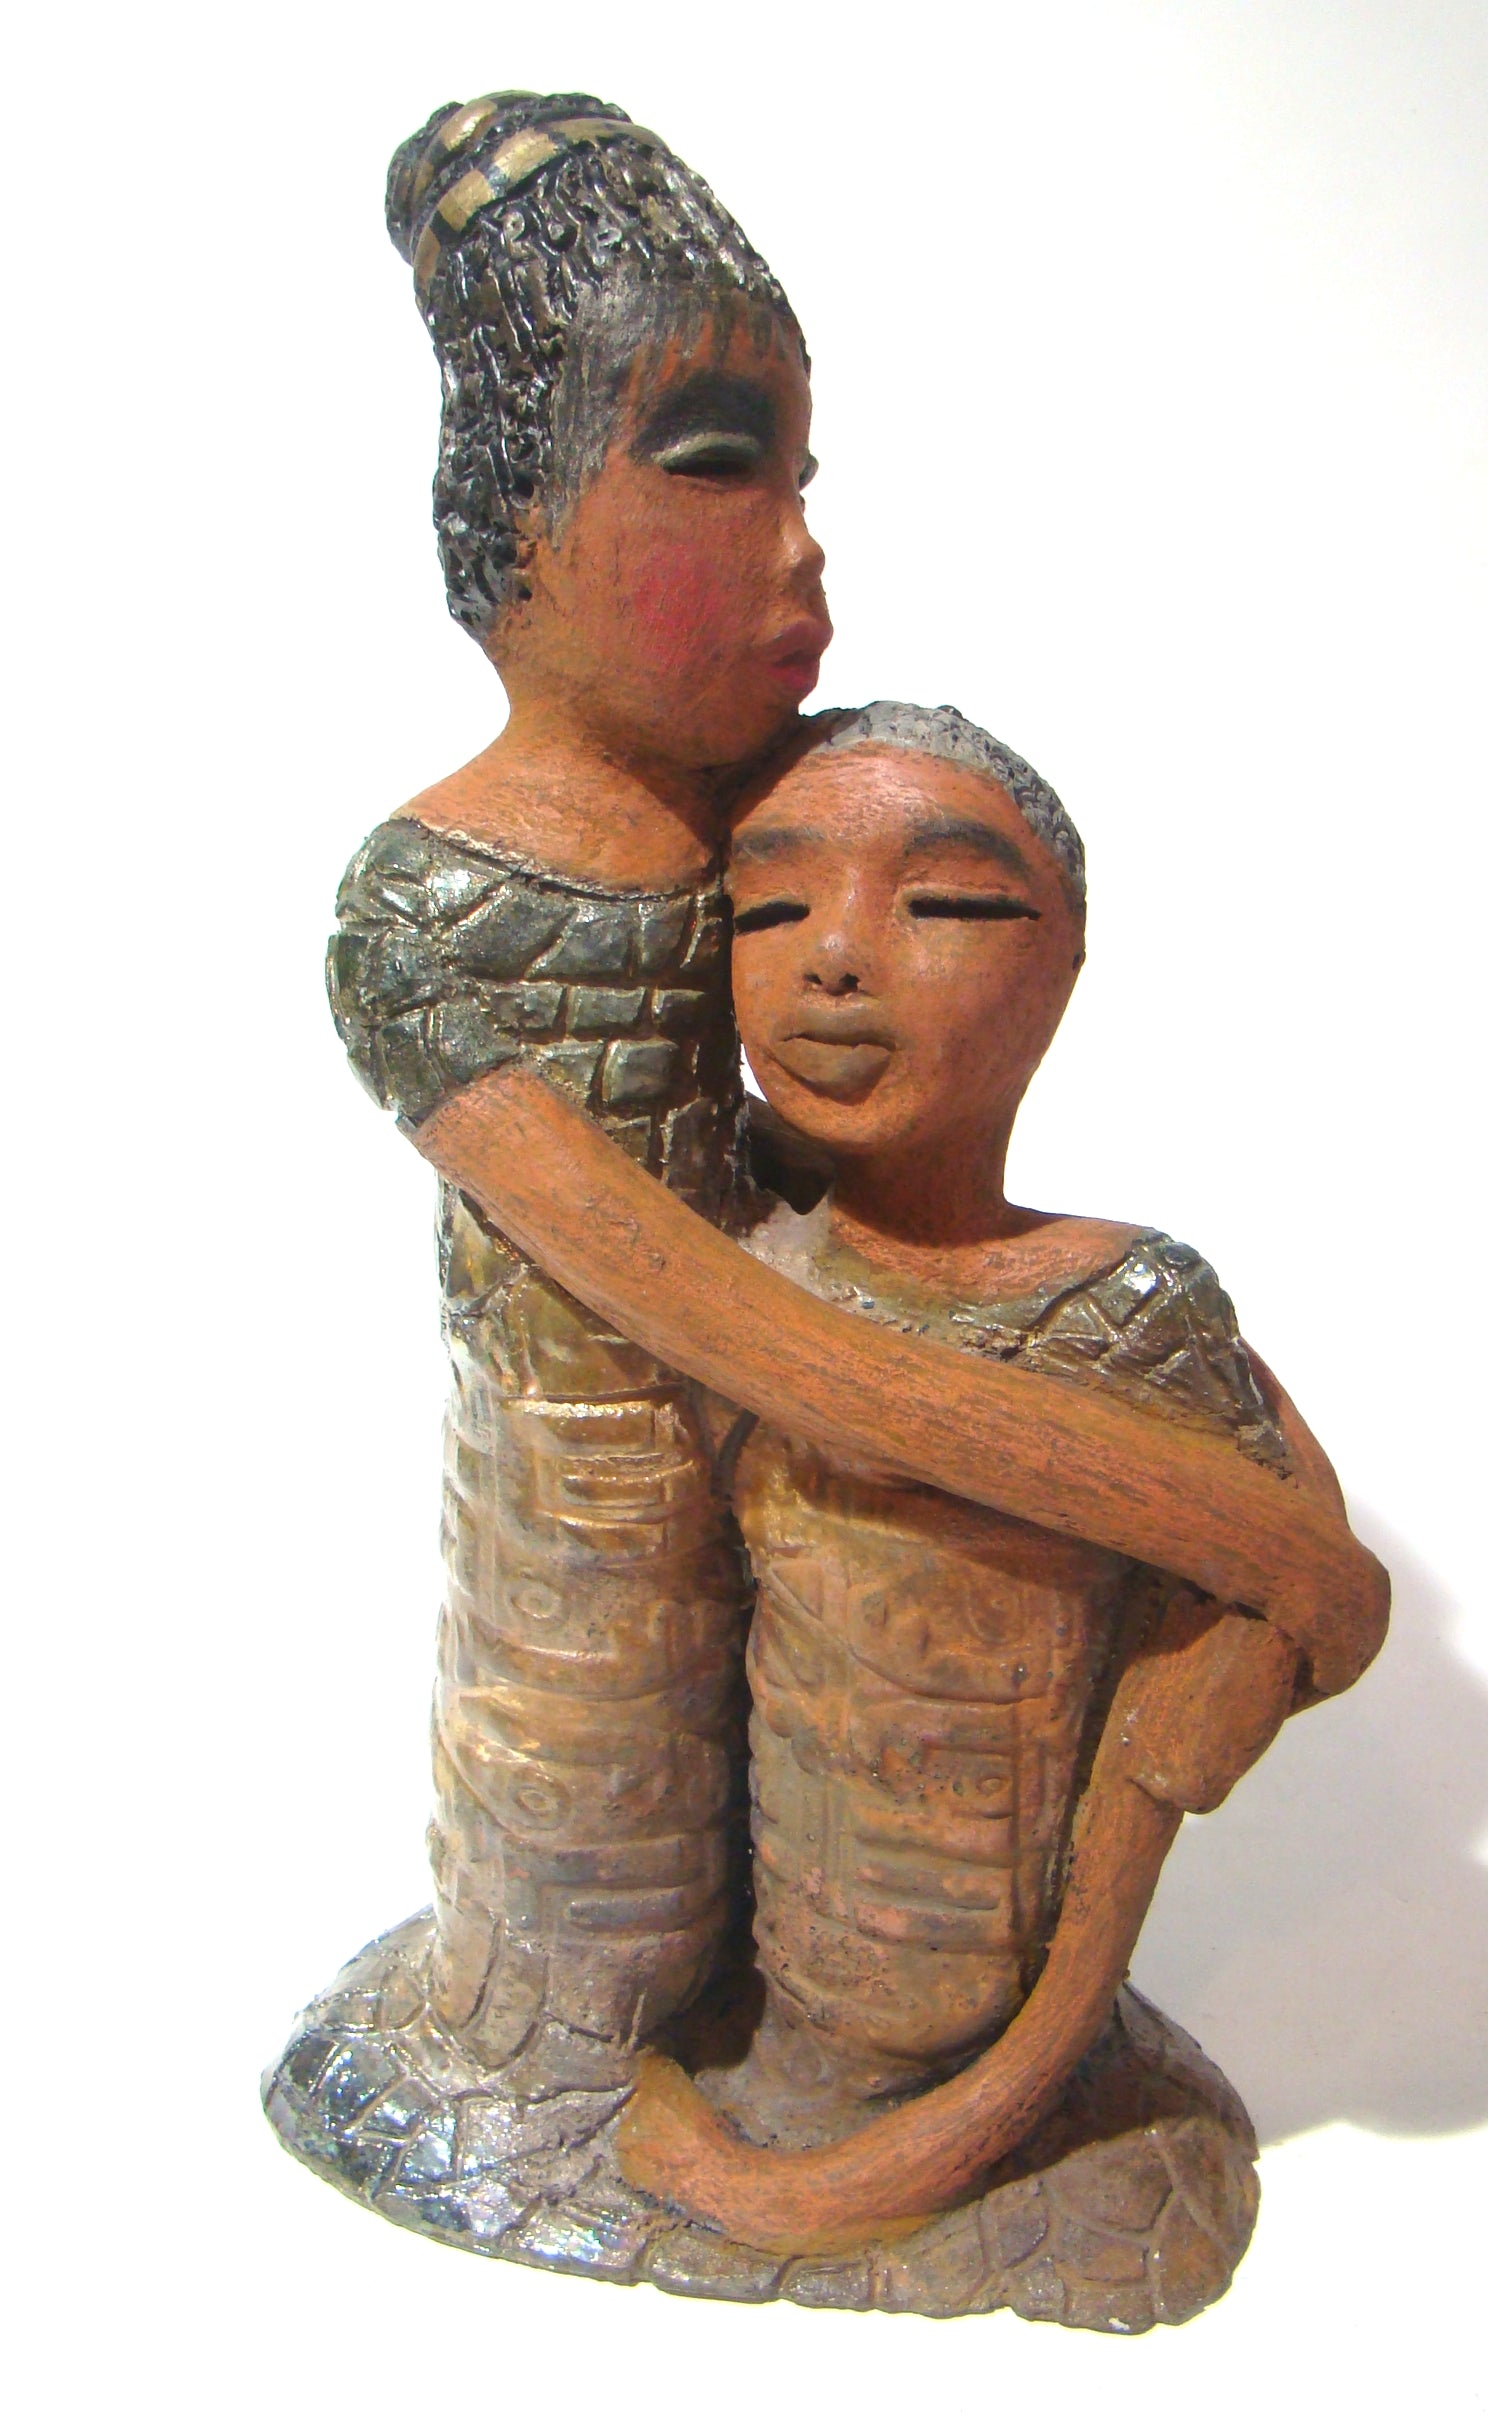 Girl Talk with my Mom stands 13' x 7" x 4" and weighs 14.lbs. They were raku fired etched metallic copper dresses. Their hair is made of clay and raised into an etched bun. They have lovely honey brown complexions and long loving arms. Girl Talk with my Mom would remind one of those special moments in tim